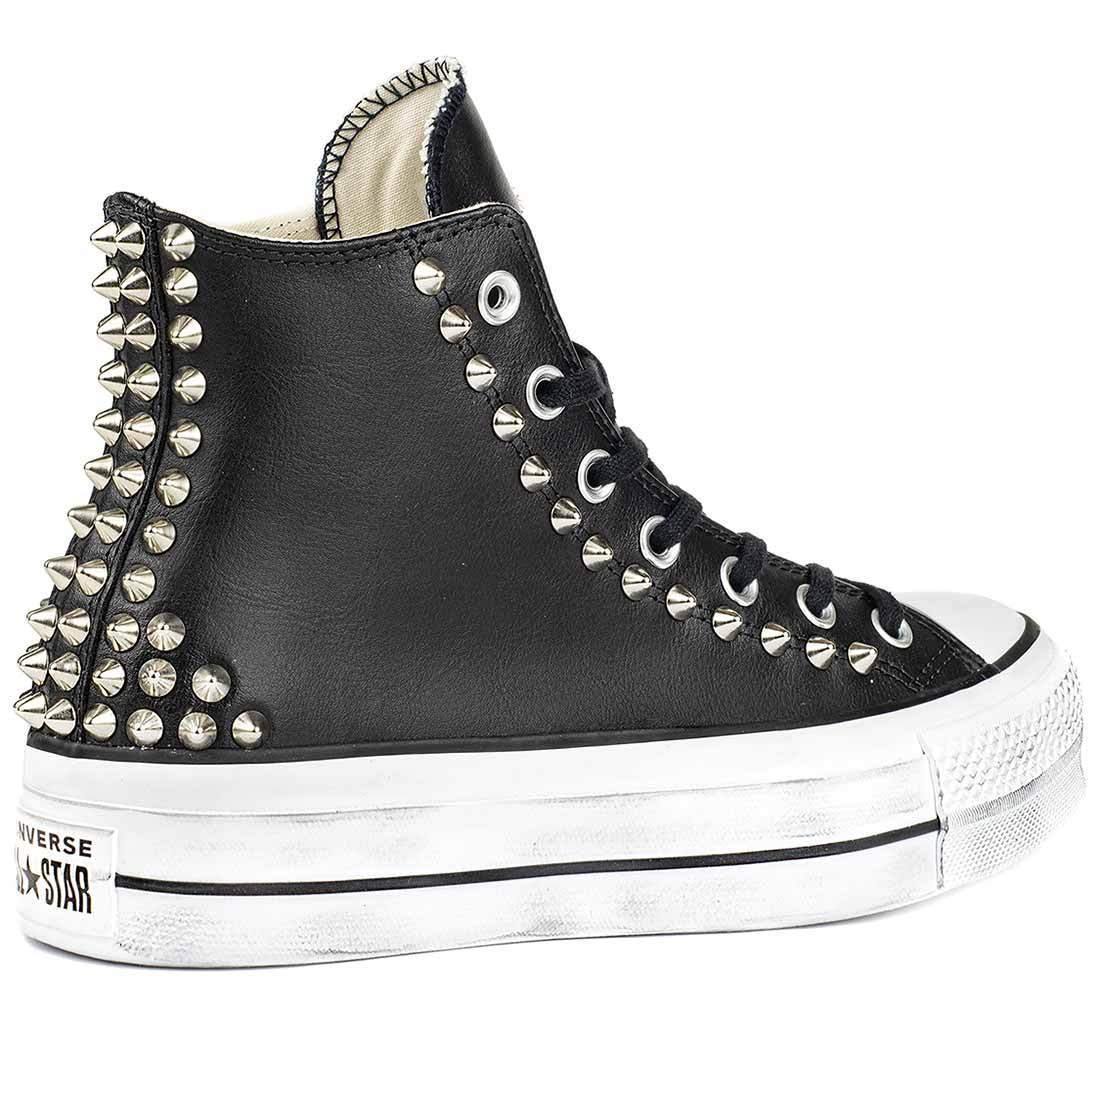 Converse All Star Platform in Pelle Nere con Borchie | Racoon-LAB